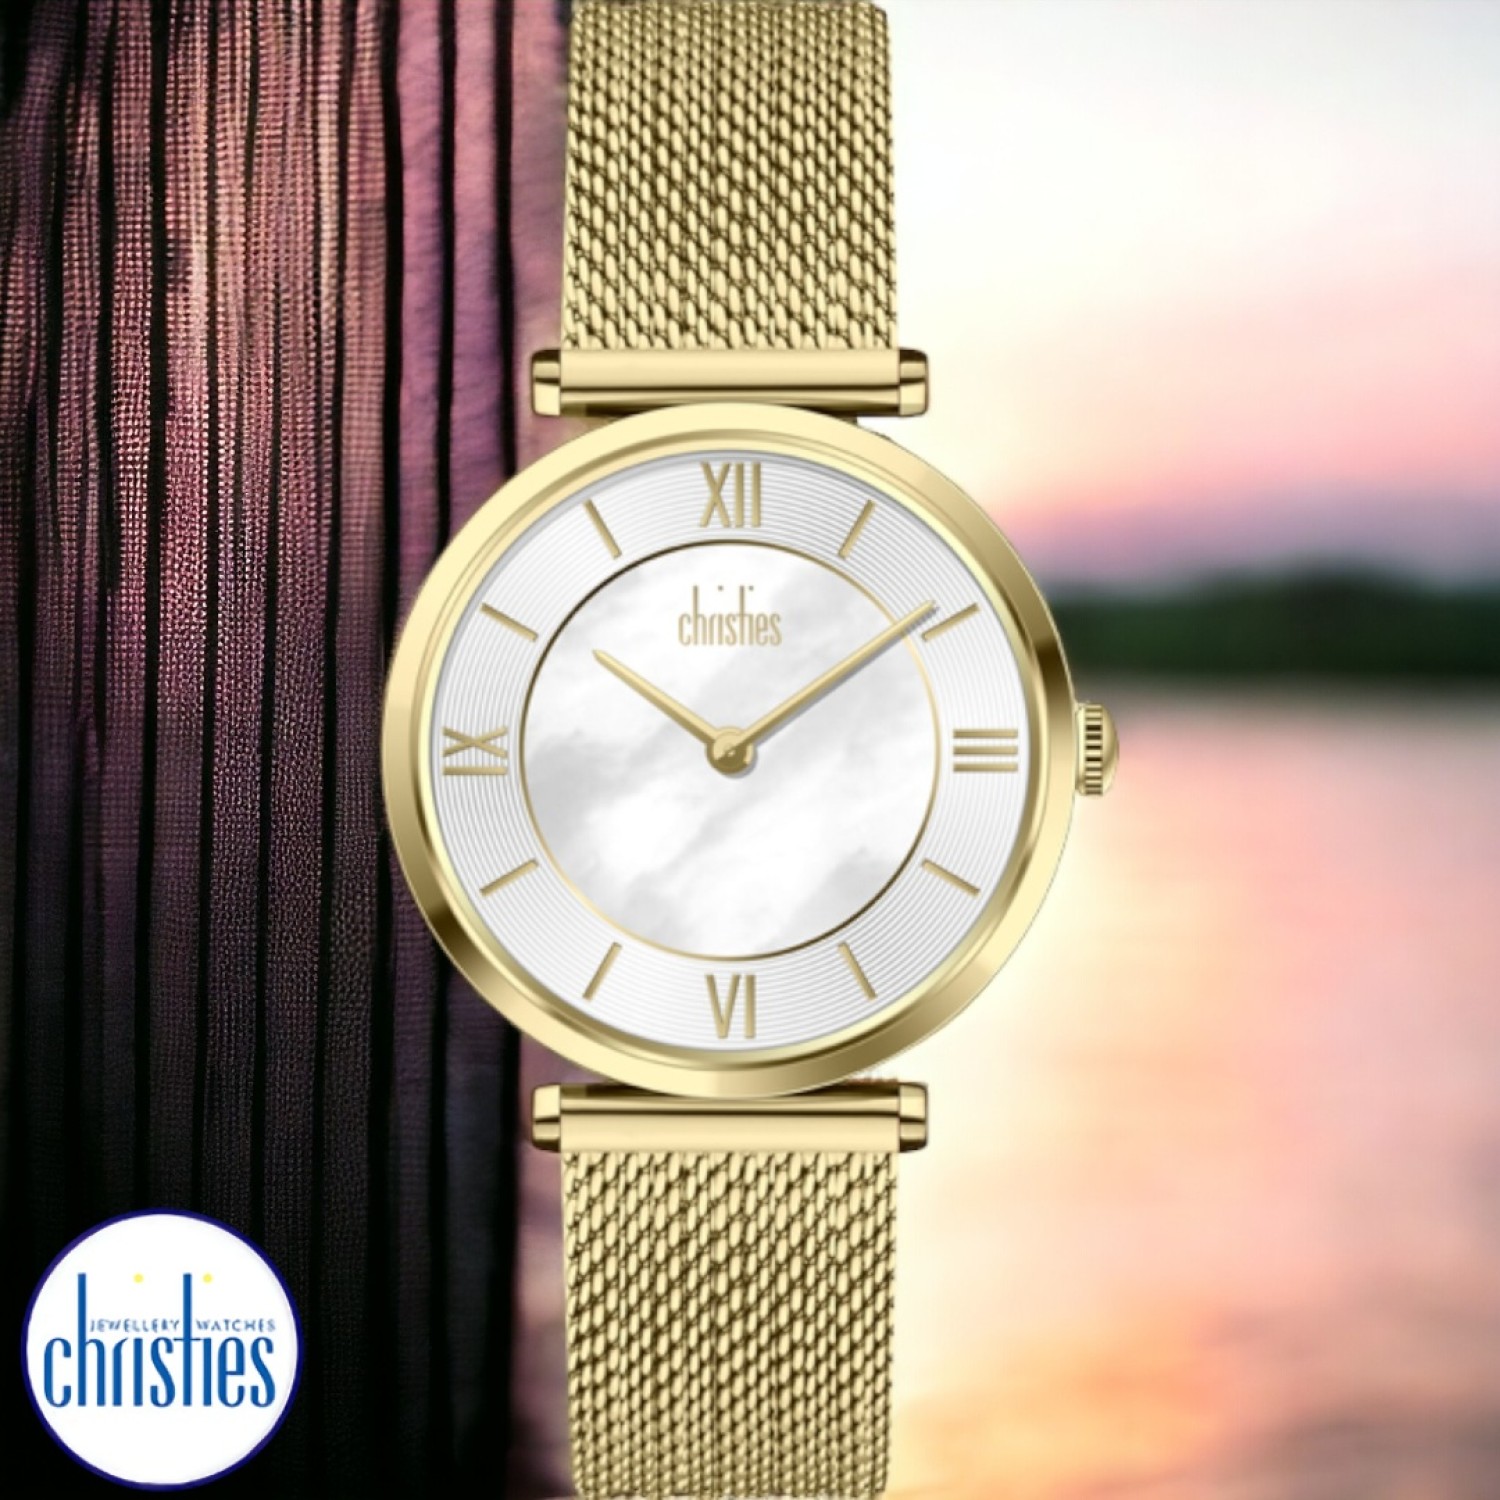 AW458-V2 Christies Luxe Gold Mesh Strap Watch AW458-V2  Christies Jewellery NZ- Christies Jewellery Online and Auckland - Free Delivery - Afterpay, Laybuy and Zip  the easy way to pay